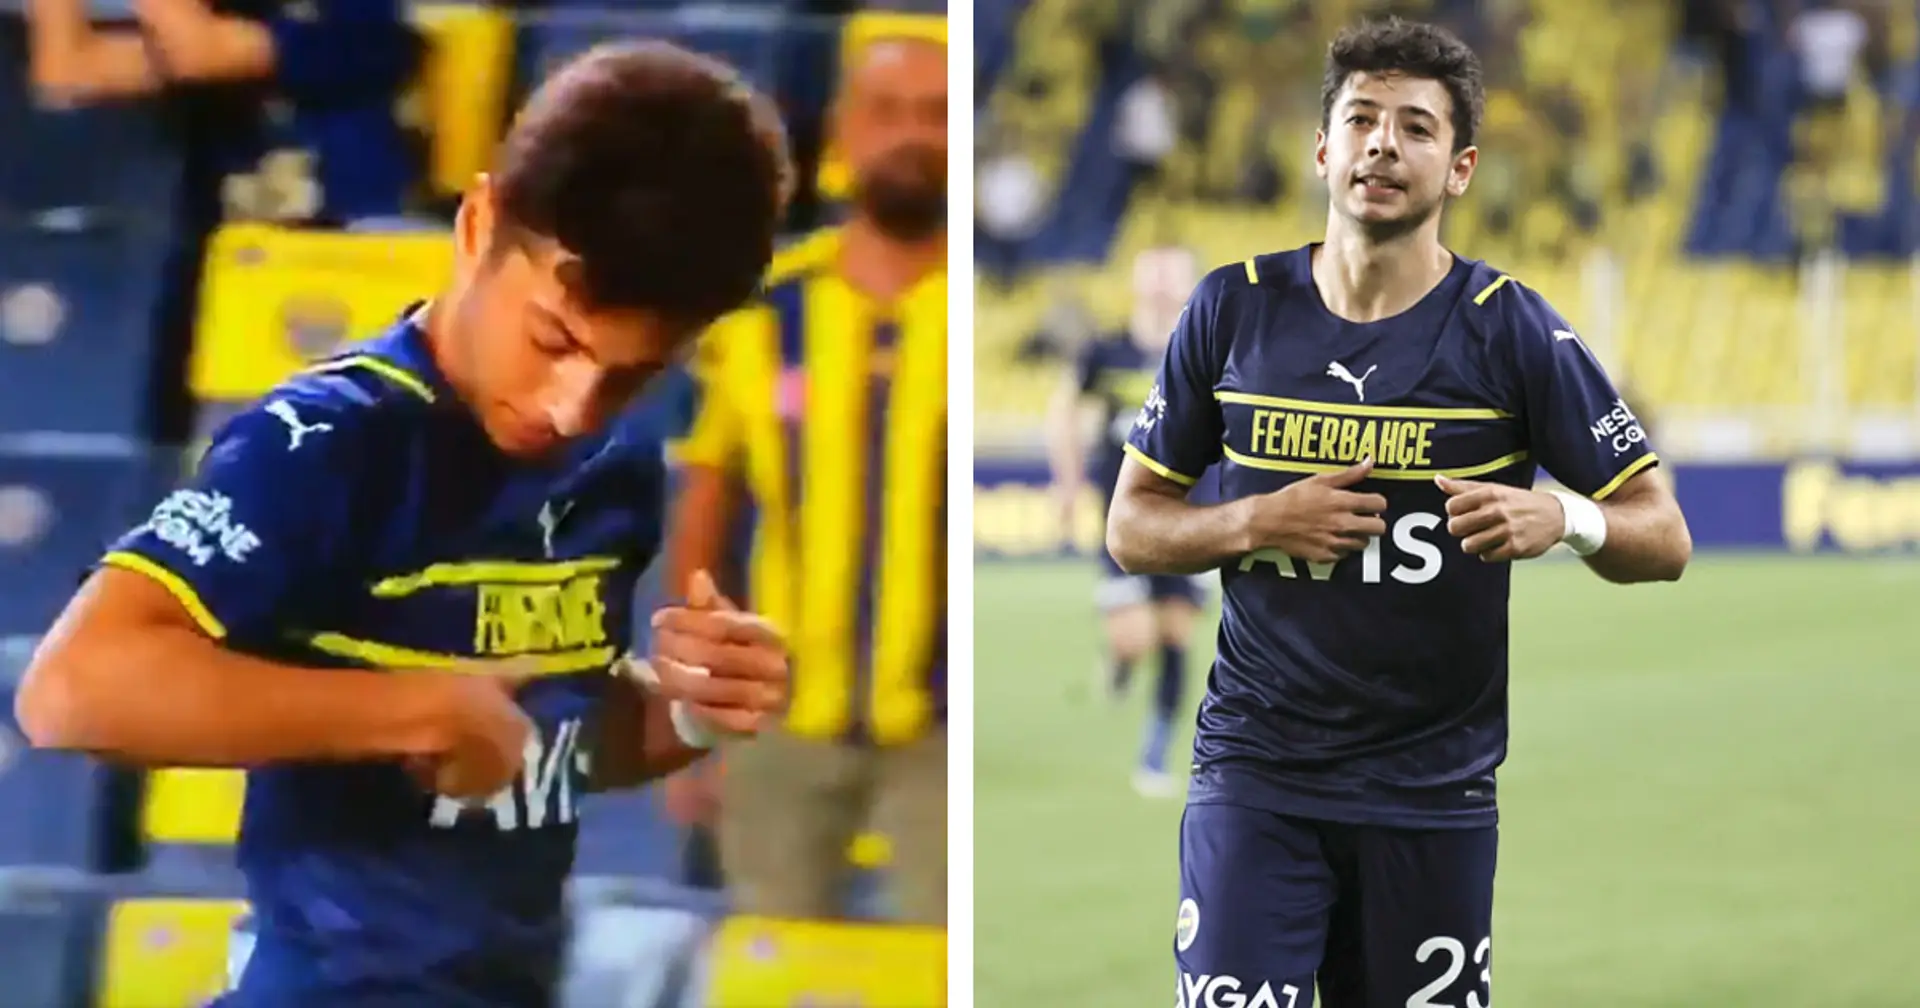 Fenerbache player tries to kiss crest on Puma kit, can't find it because of design flaw